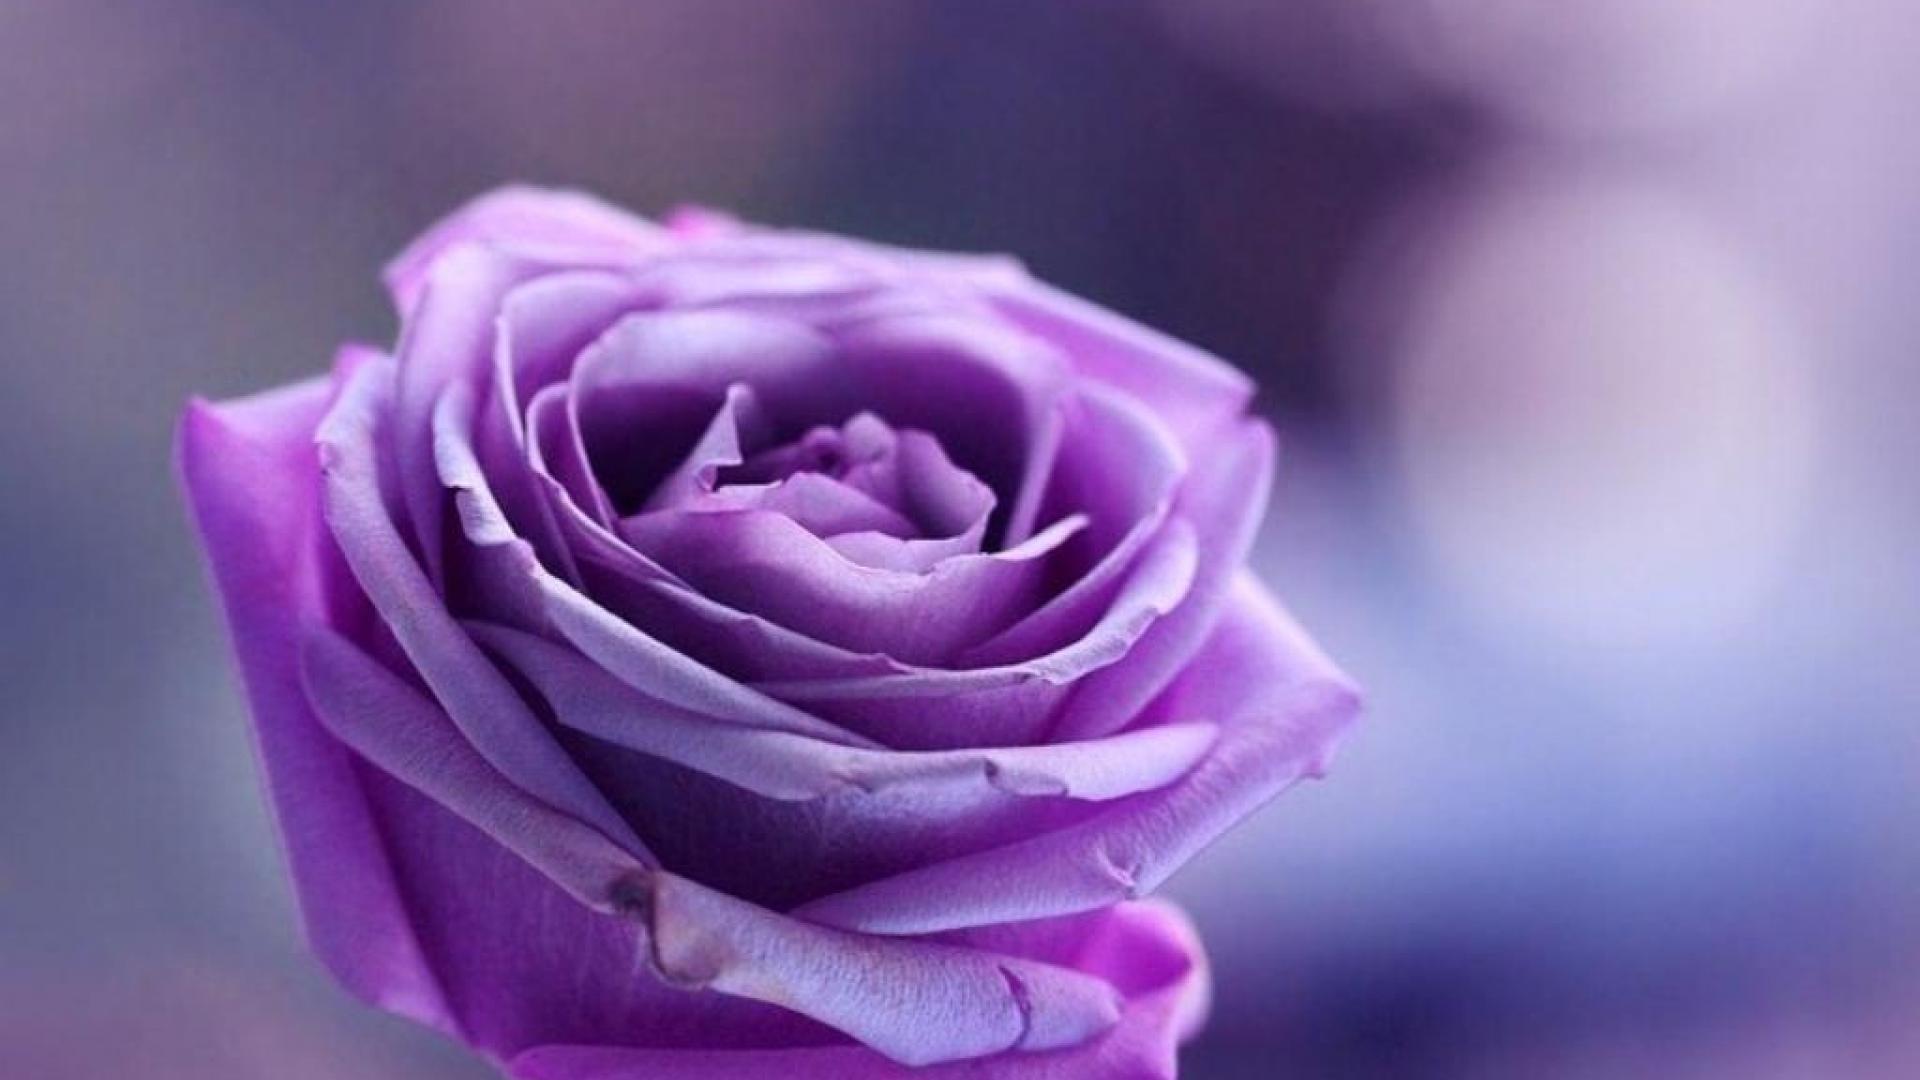 Purple Roses Background Wallpaper High Definition Quality